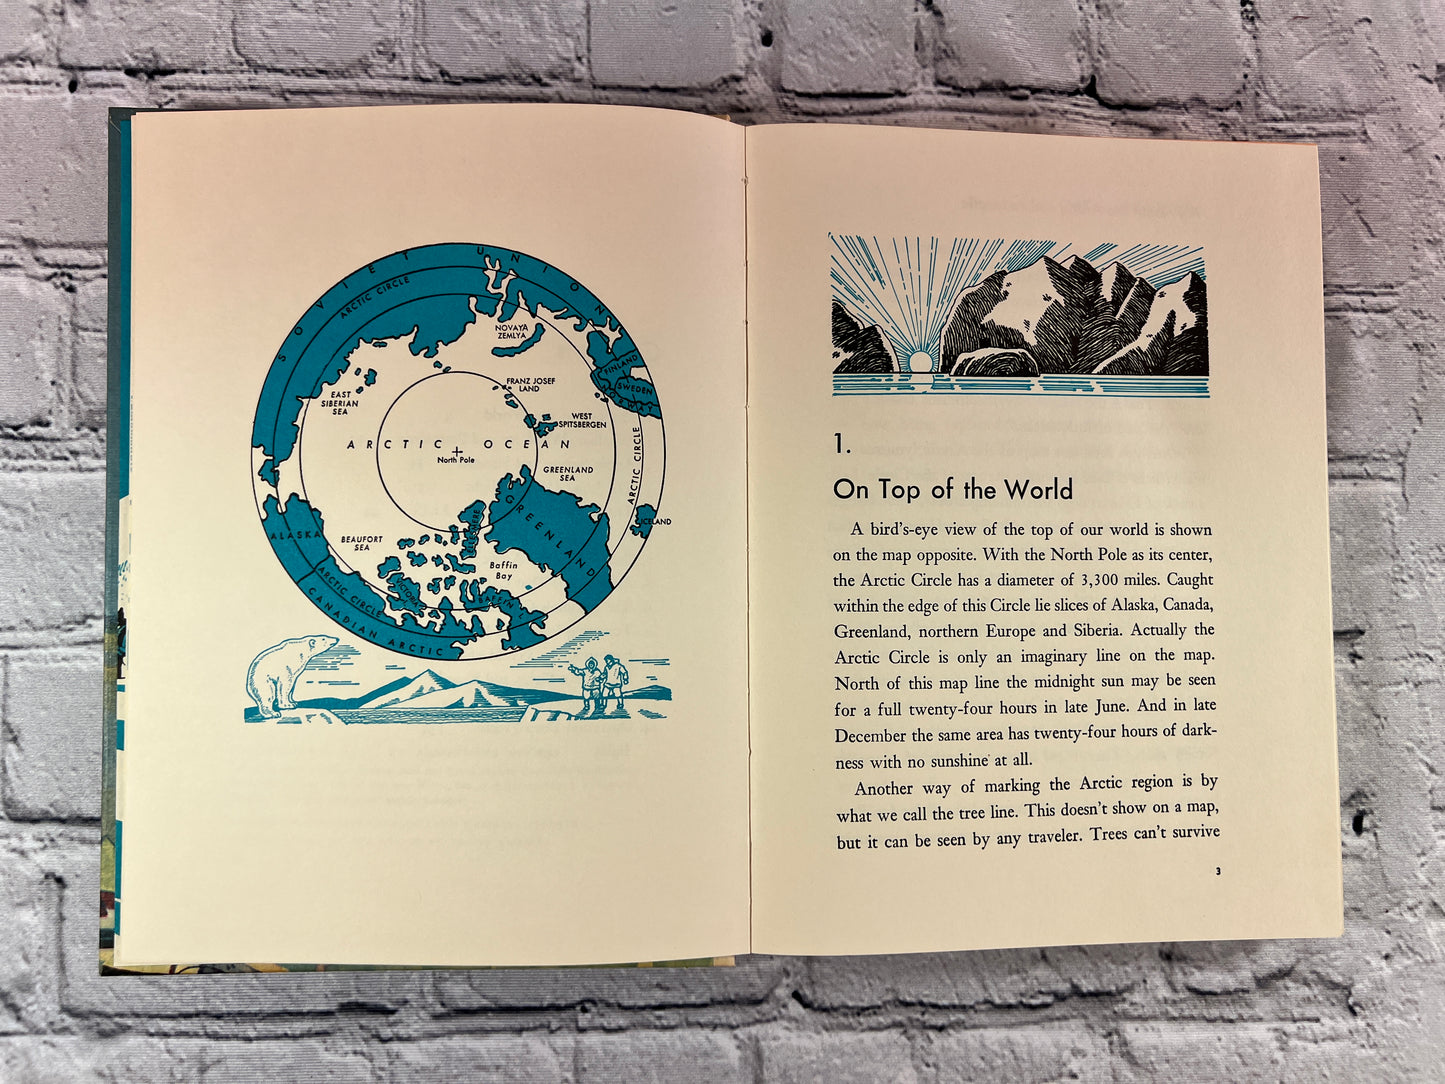 All About Books 20. All About the Arctic and Antarctic by Armstrong Sperry [1957]